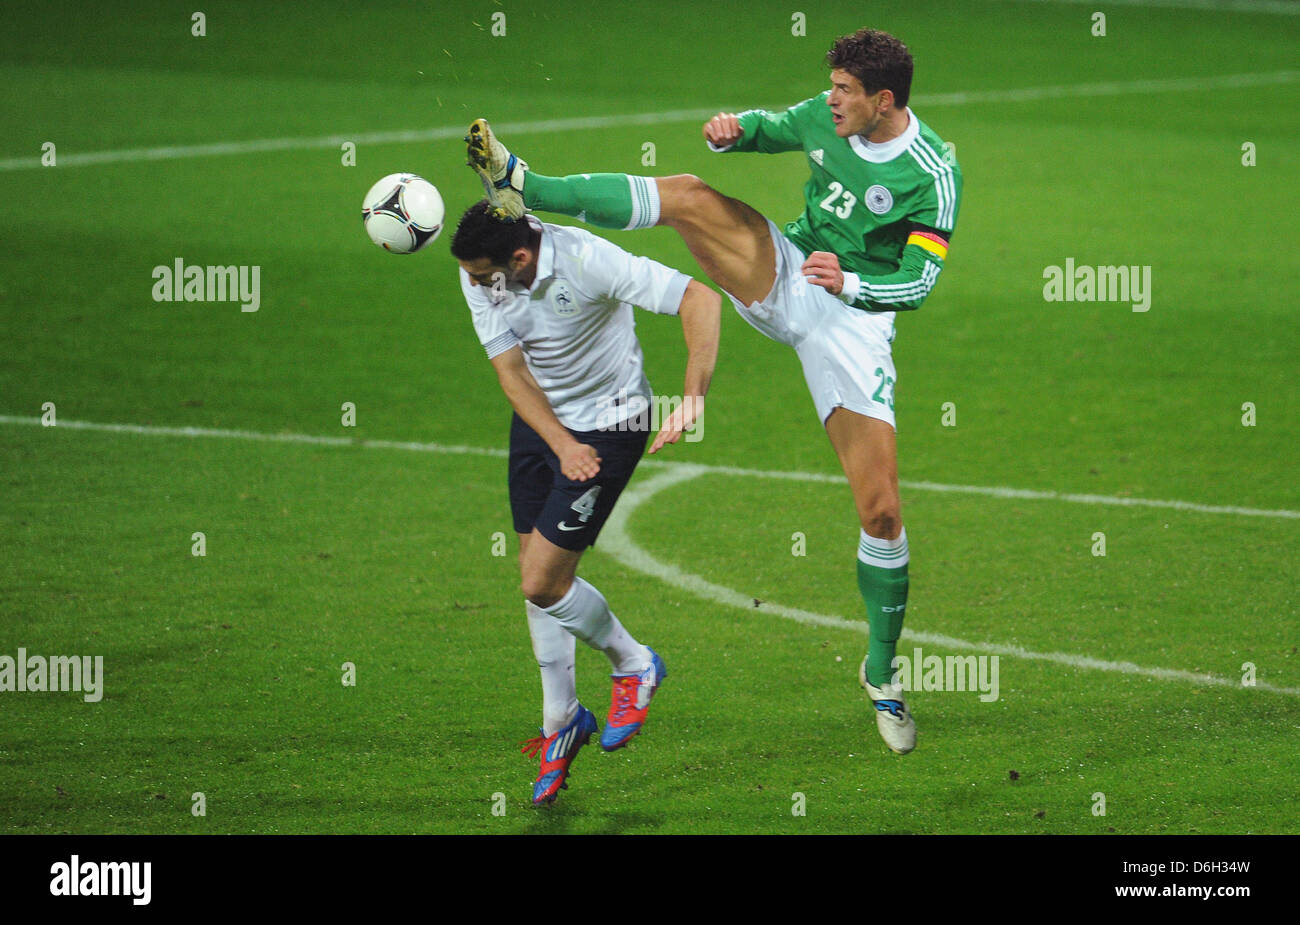 Germany's Mario Gomez (R) and Adil Rami of France fight for the ball during the international friendly soccer match Germany vs France at the Weser stadium in Bremen, Germany, 29 February 2012. Photo: Julian Stratenschulte dpa/lni  +++(c) dpa - Bildfunk+++ Stock Photo